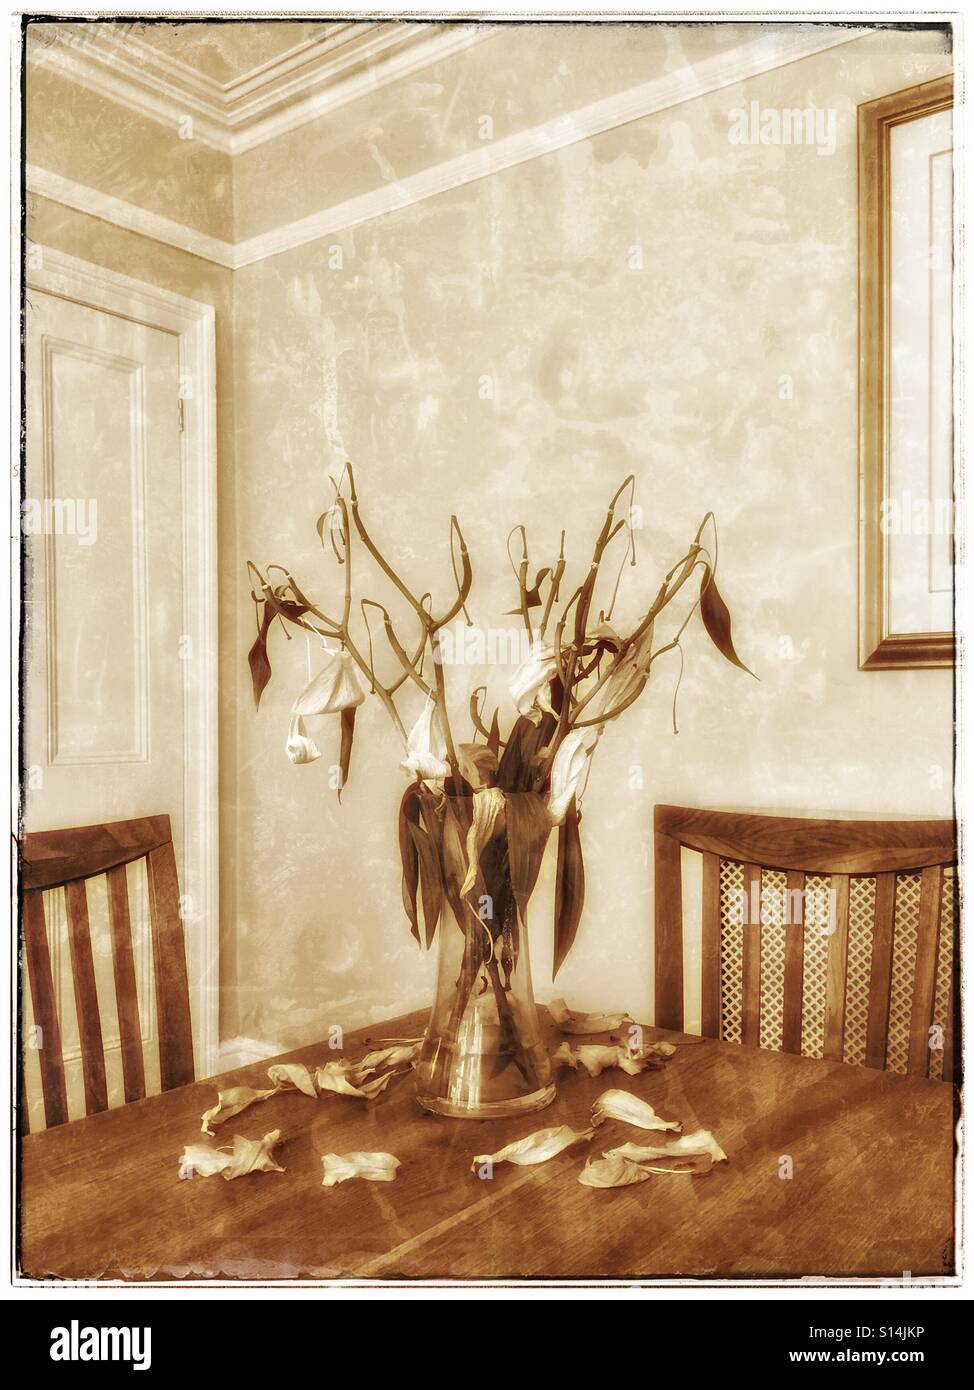 A glowing grunge effect picture showing a vase of dead & dying white Lilly flowers. The setting is the room in a country house - on top of a wooden table and surrounded by two chairs. © COLIN HOSKINS. Stock Photo